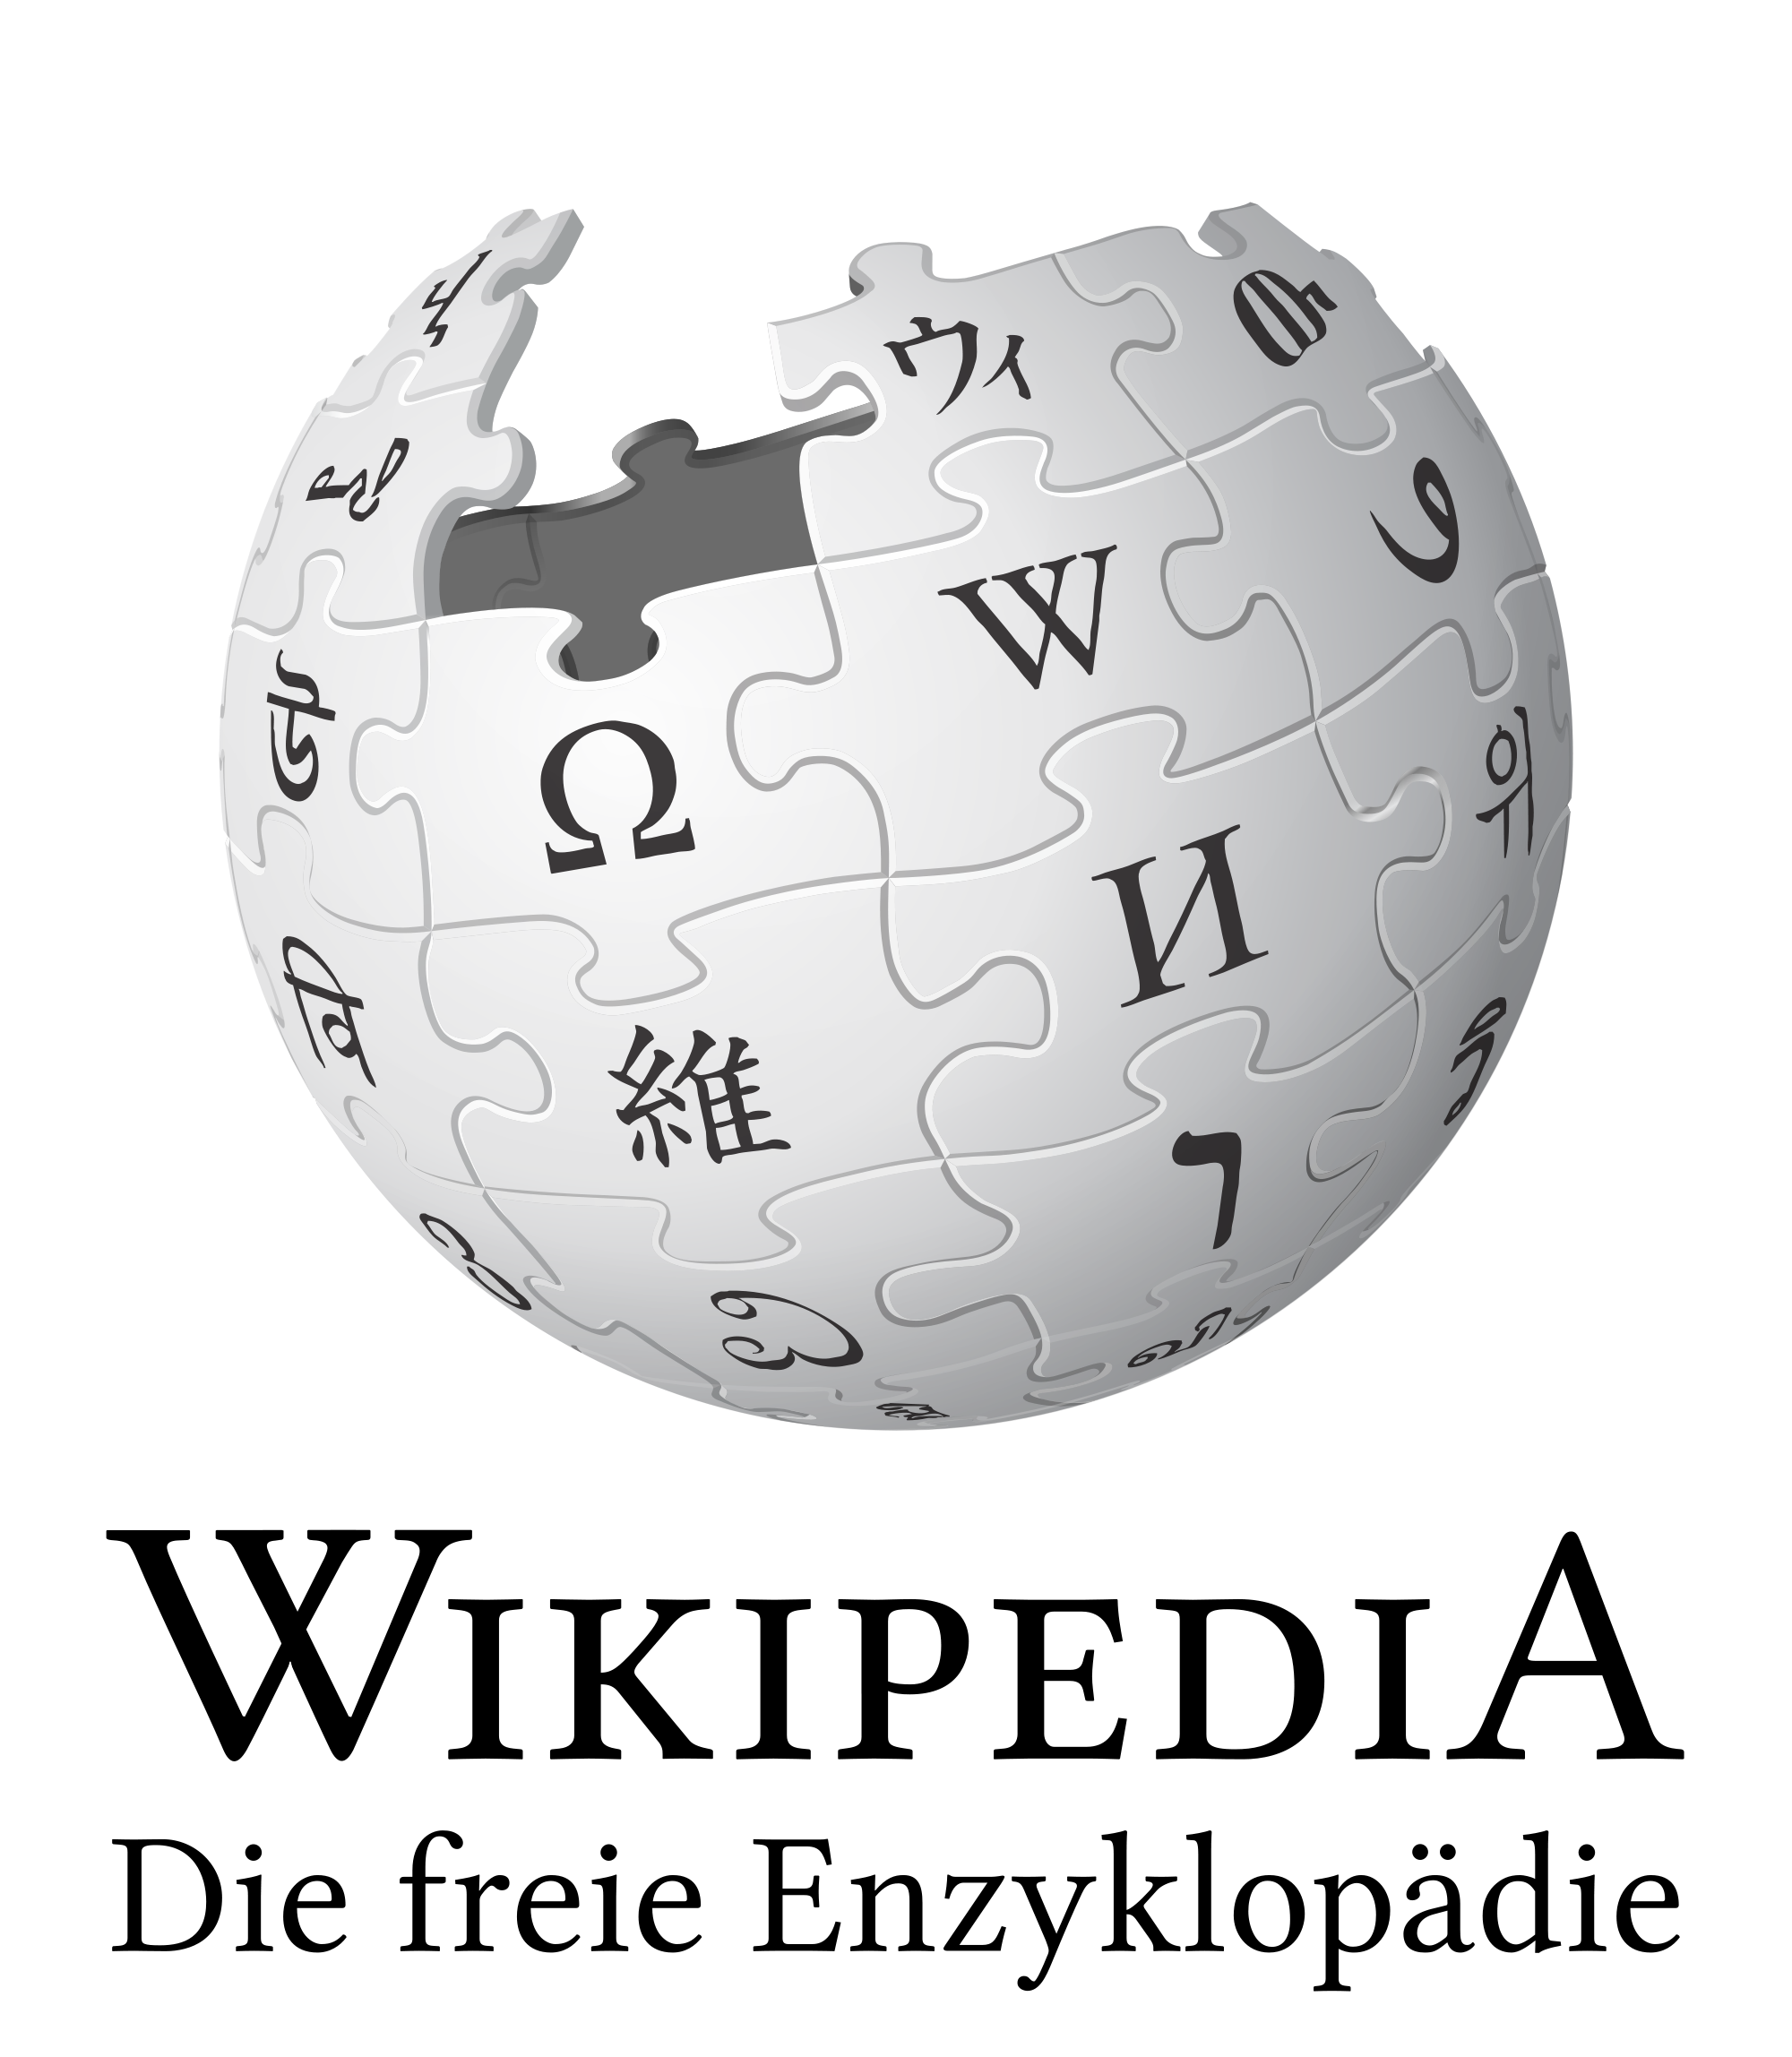 Datei:Wiki.png